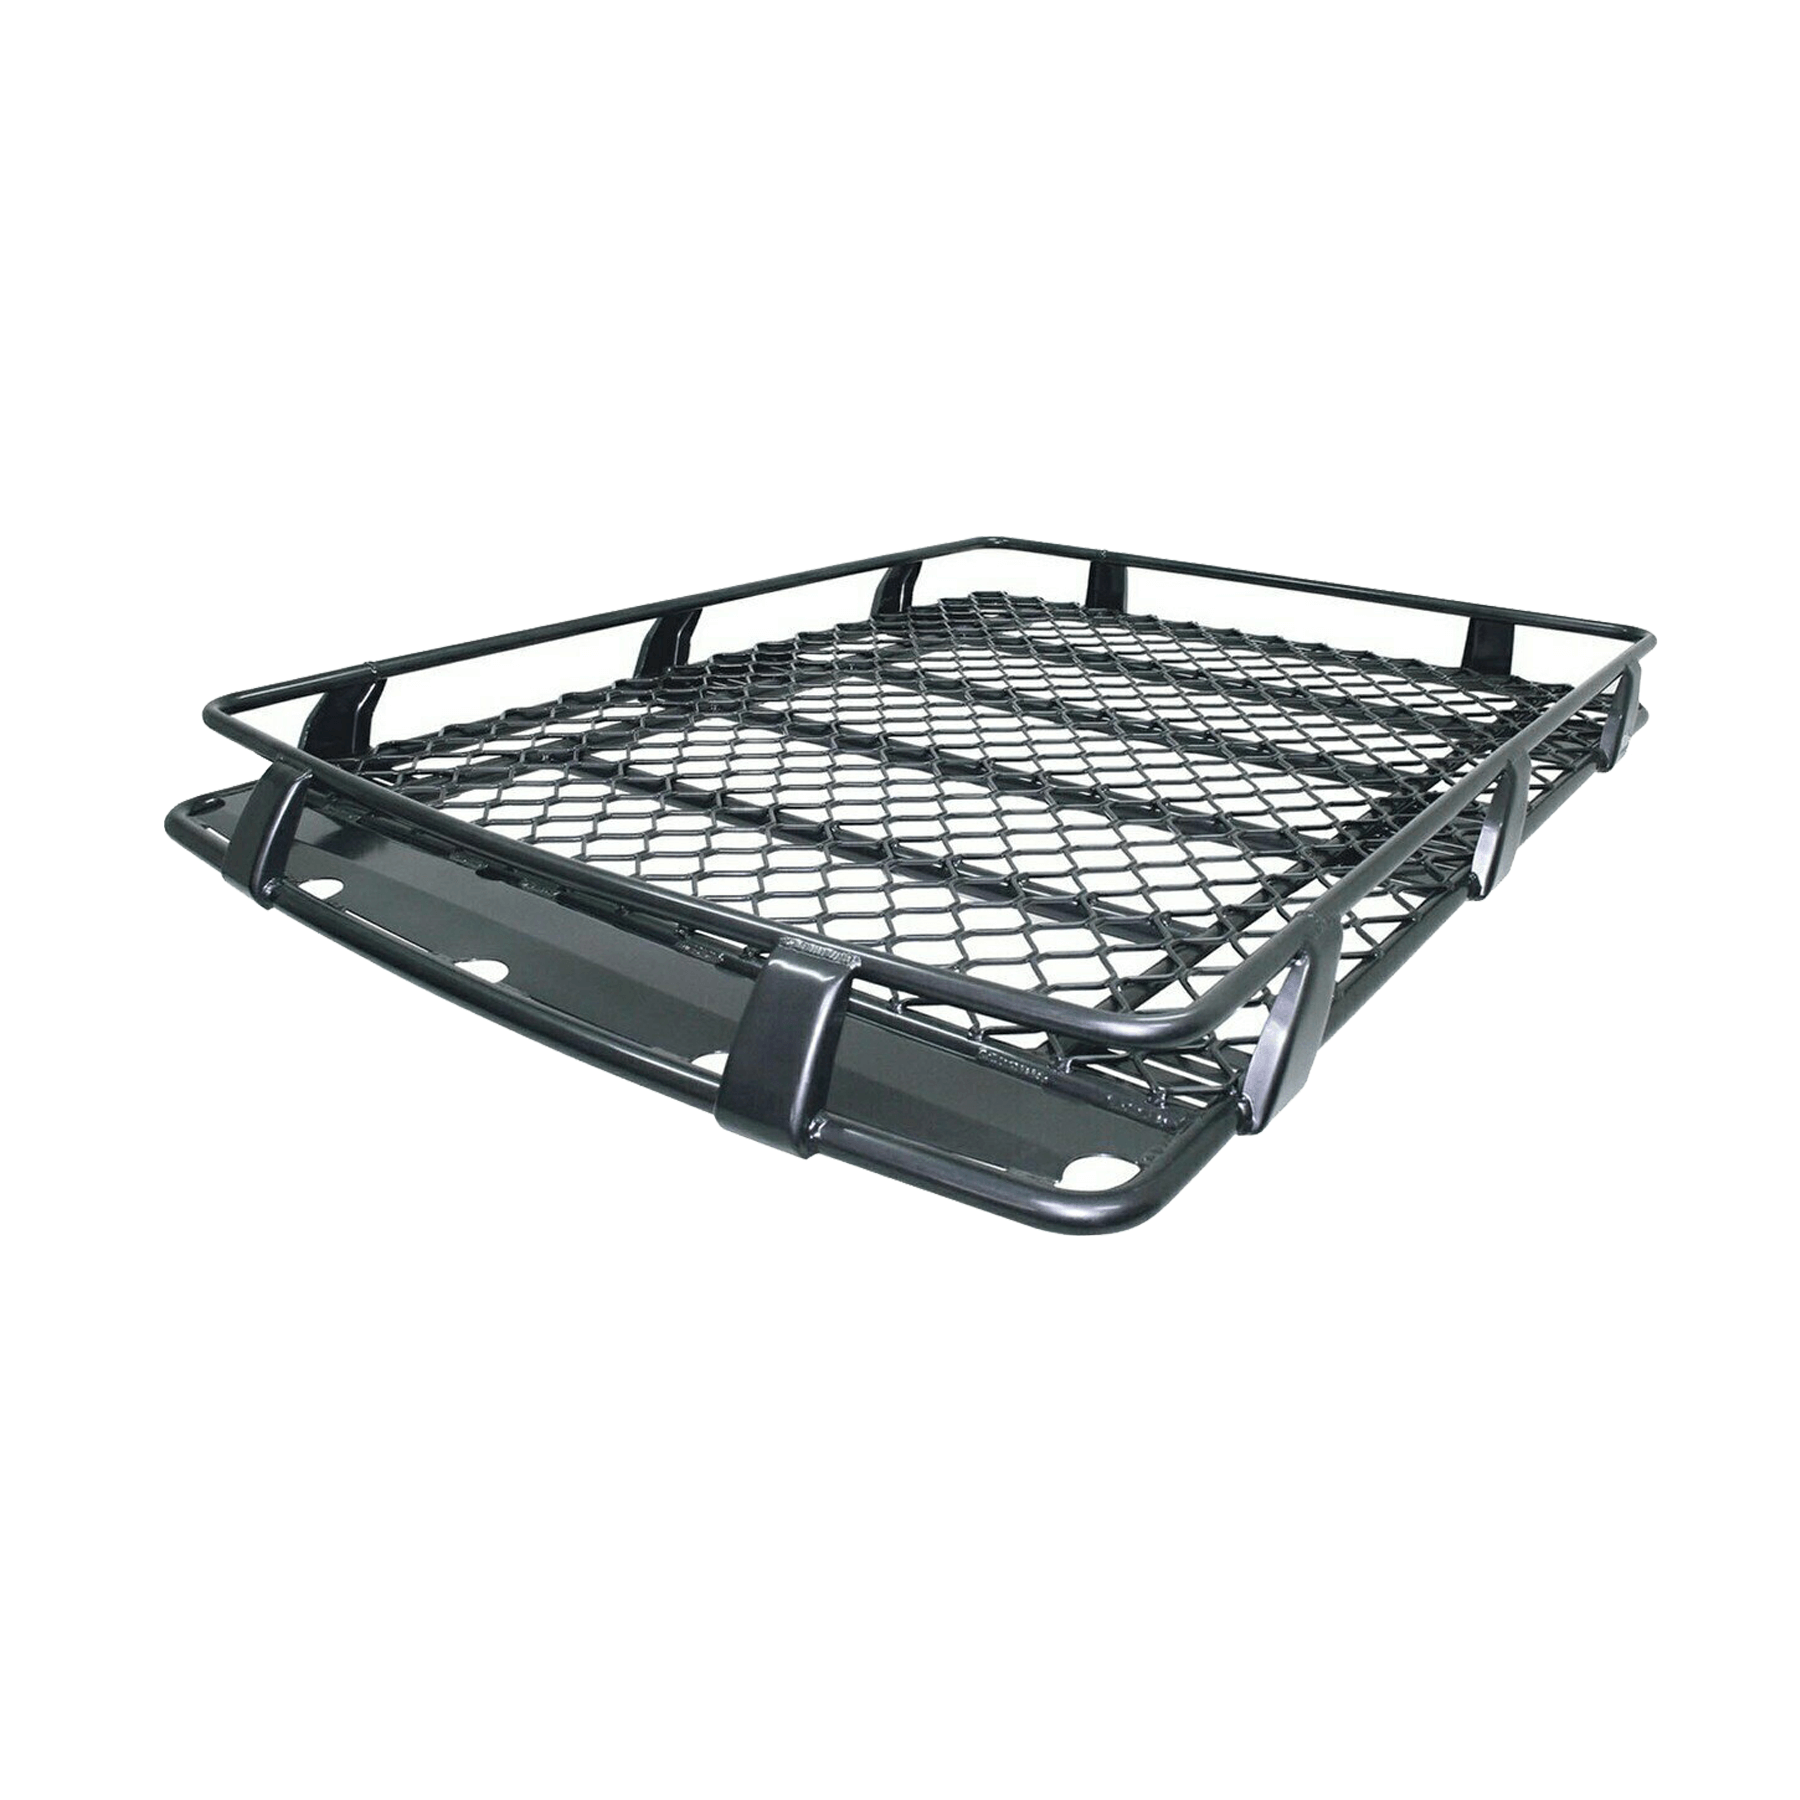 LANDCRUISER 100 SERIES 1998 to 2007  Basket Alloy Roof Rack- 1.8m x 1.25m (Open end)